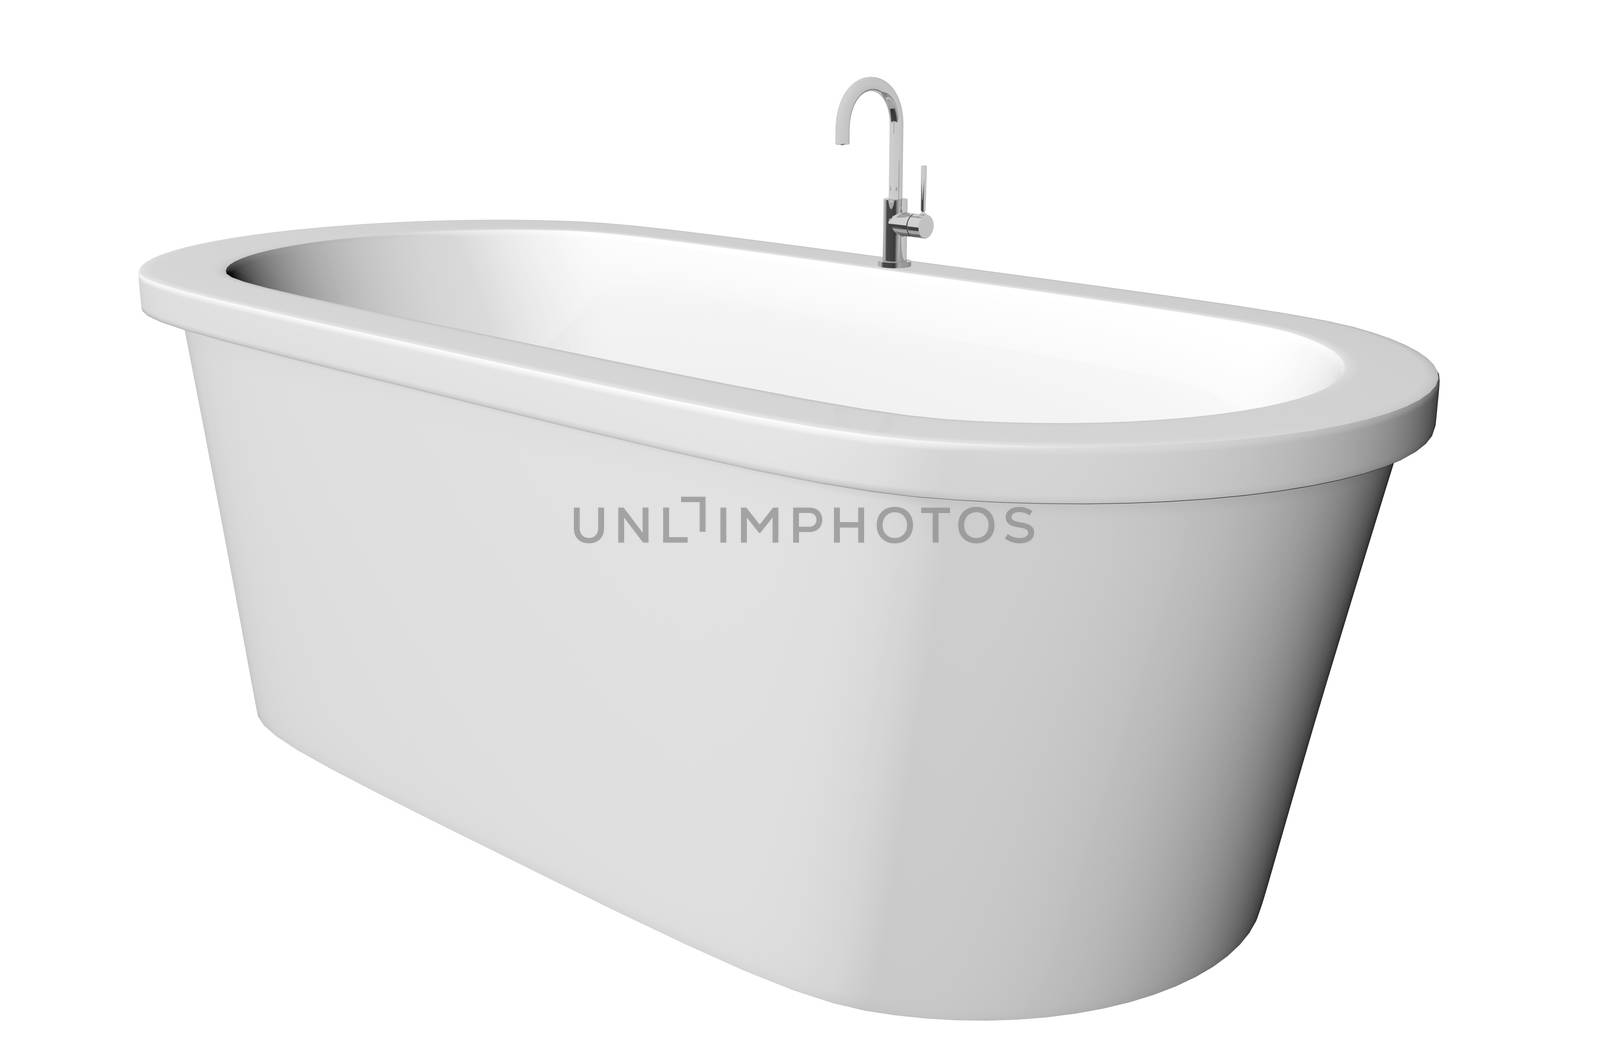 White and deep modern white bathtub with stainless steel fixtures, isolated against a white background